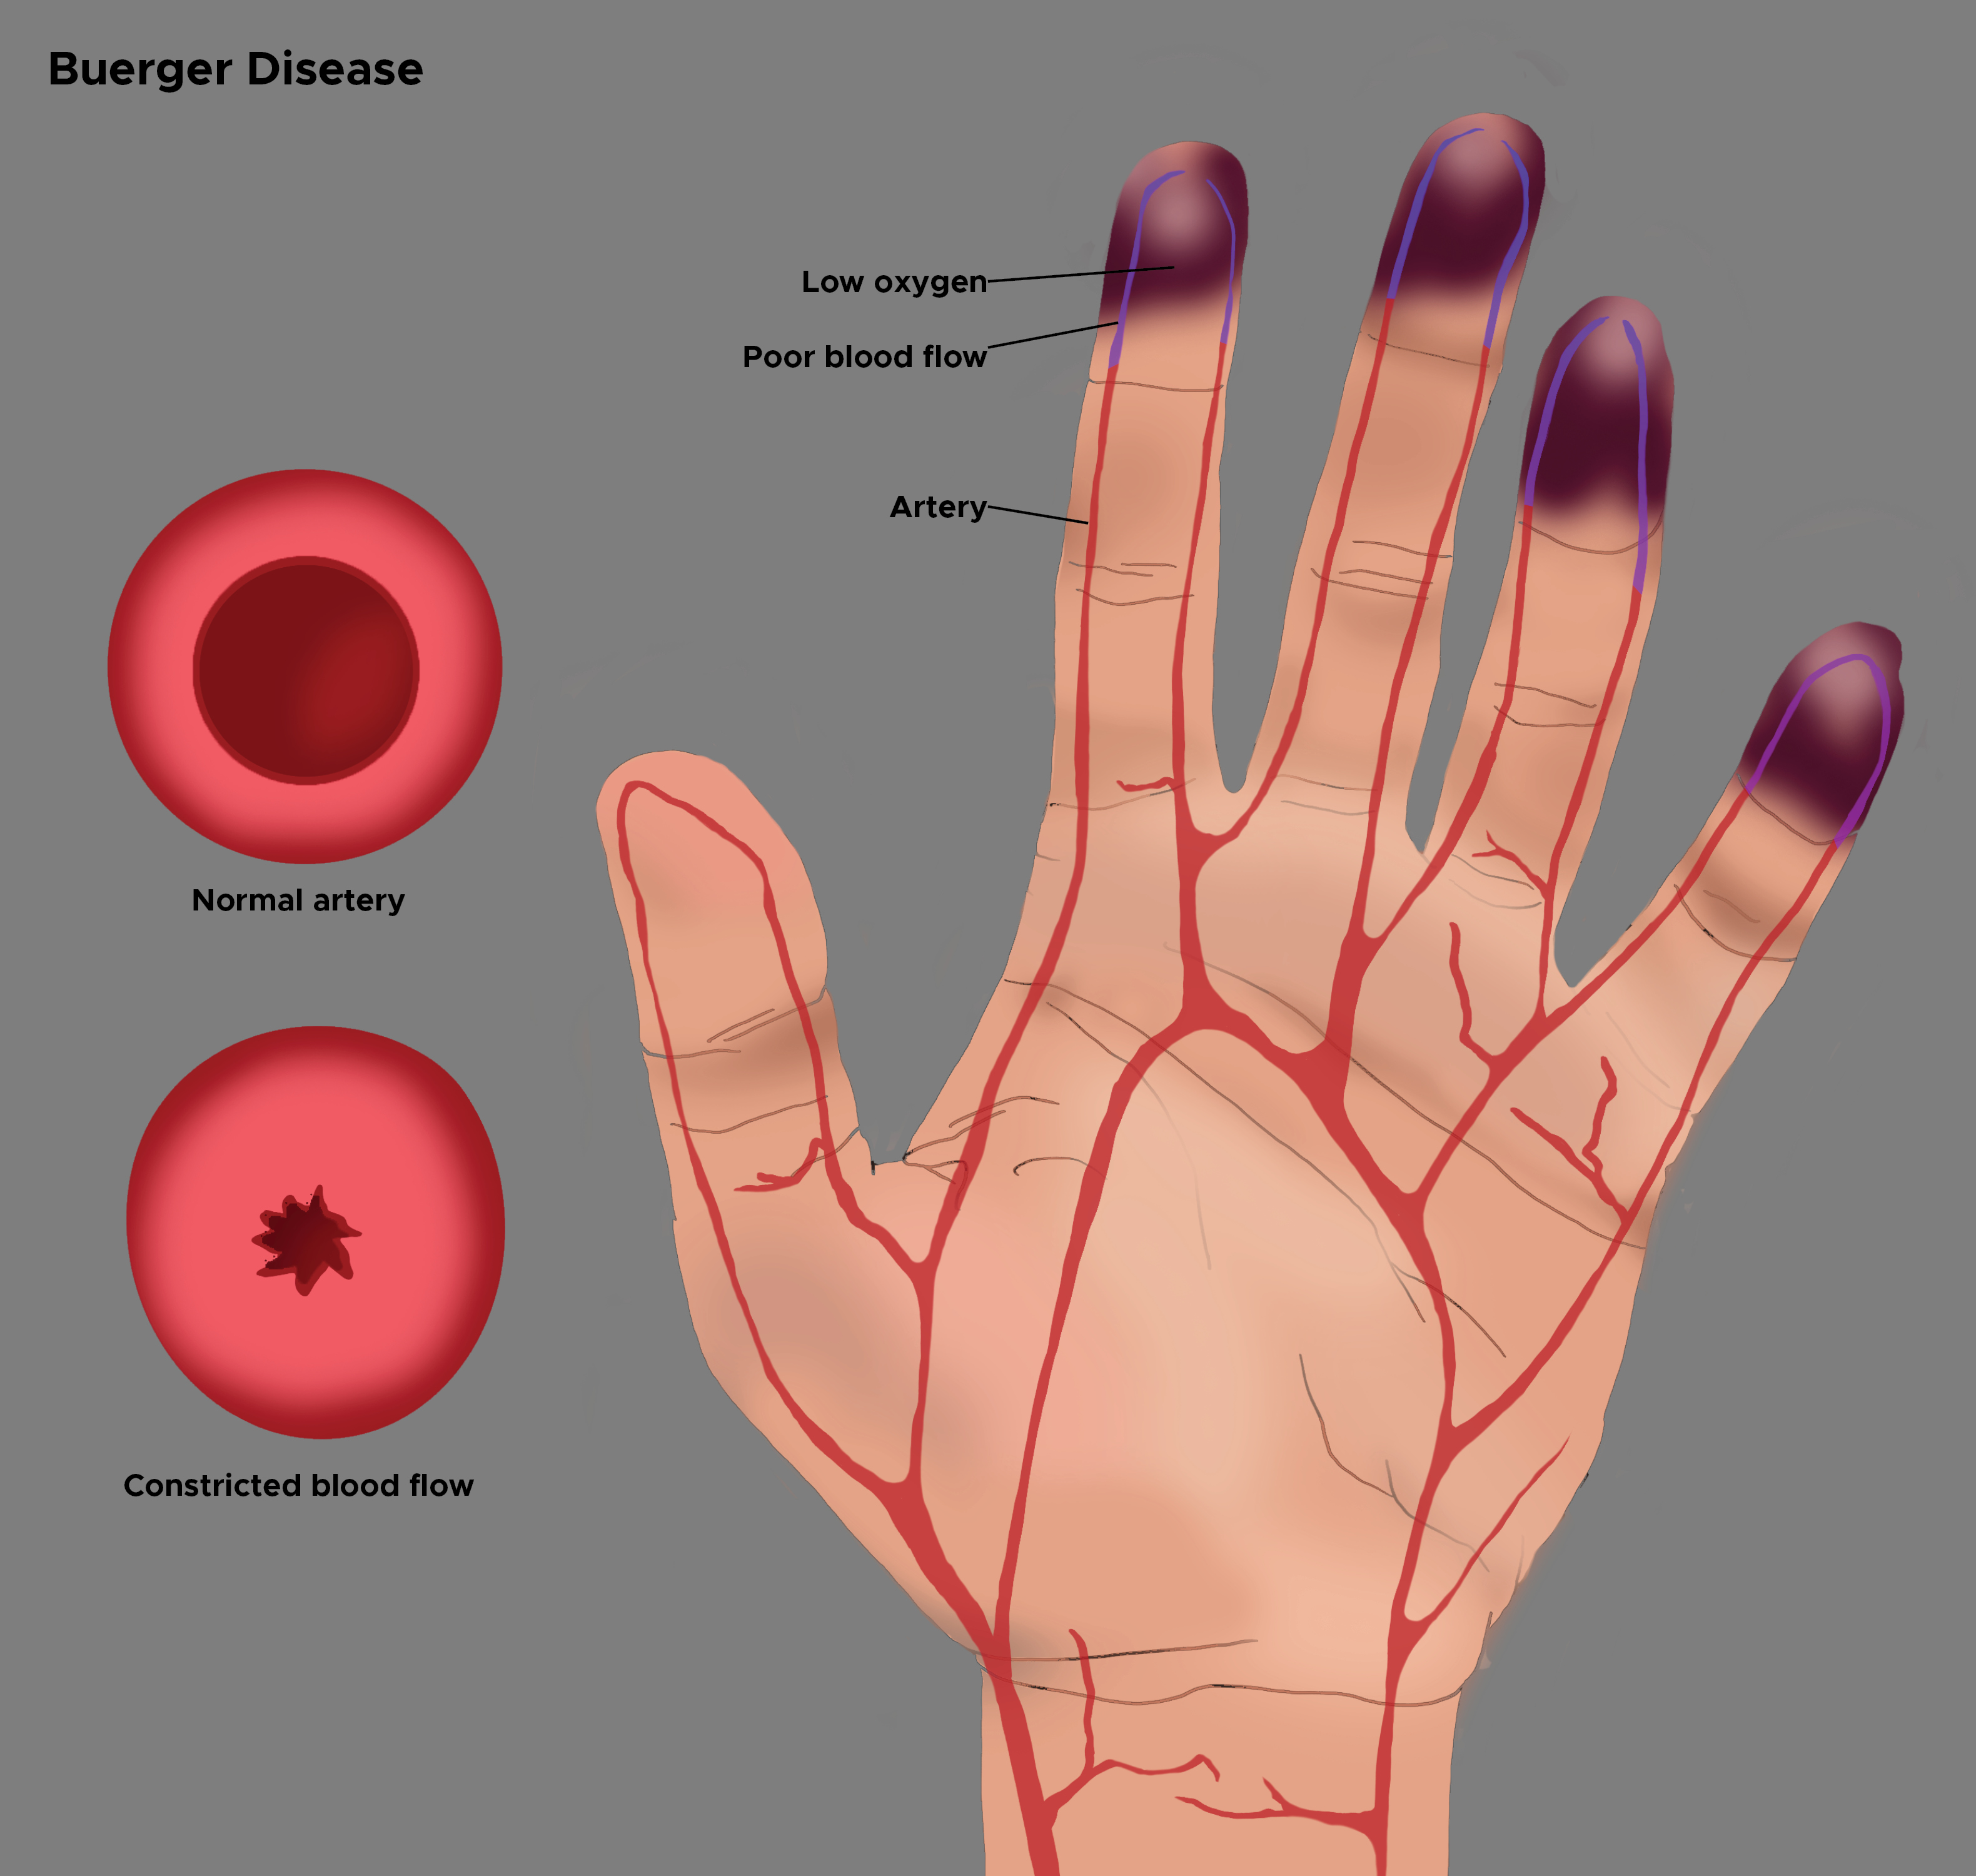 Illustration of Buerger disease. Low oxygen and constricted blood flow to the fingertips. Arteries of hand. 